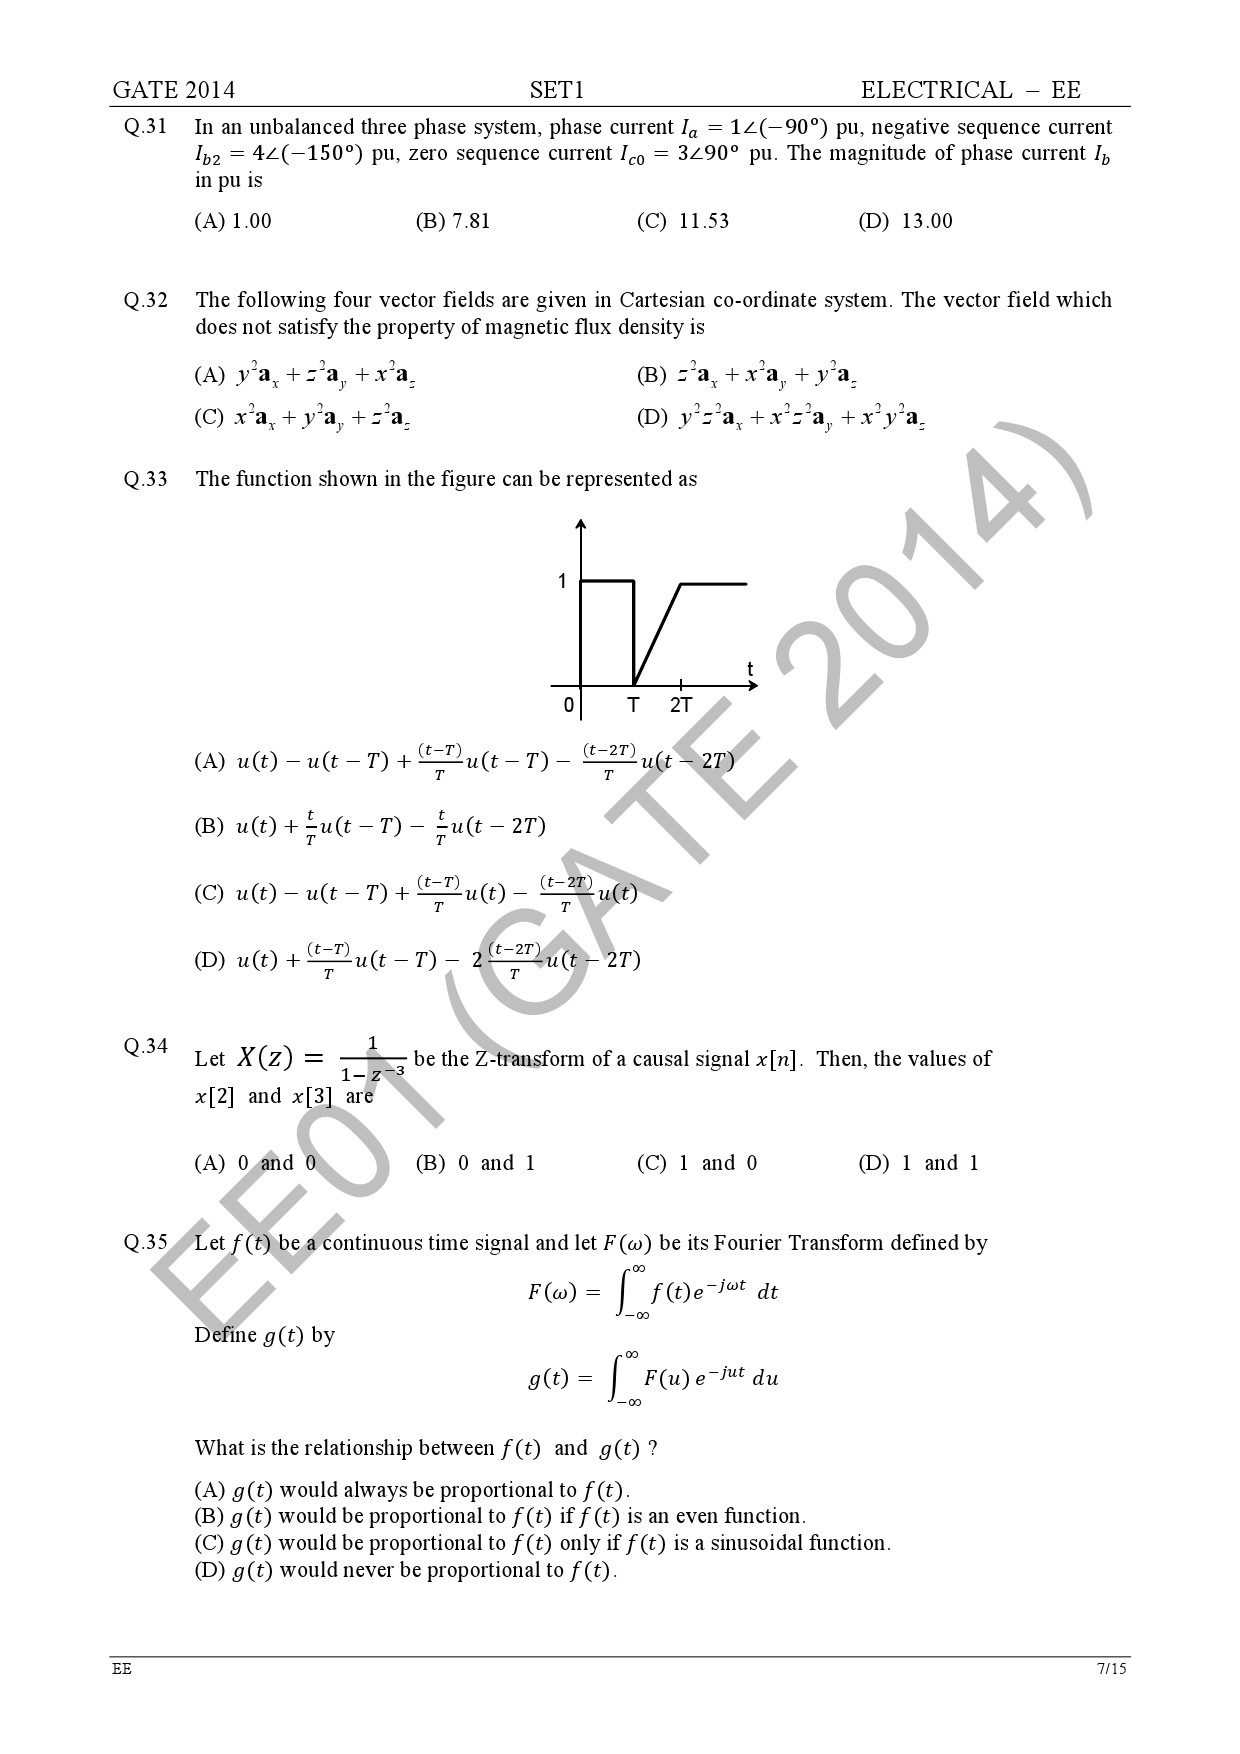 GATE Exam Question Paper 2014 Electrical Engineering Set 1 13